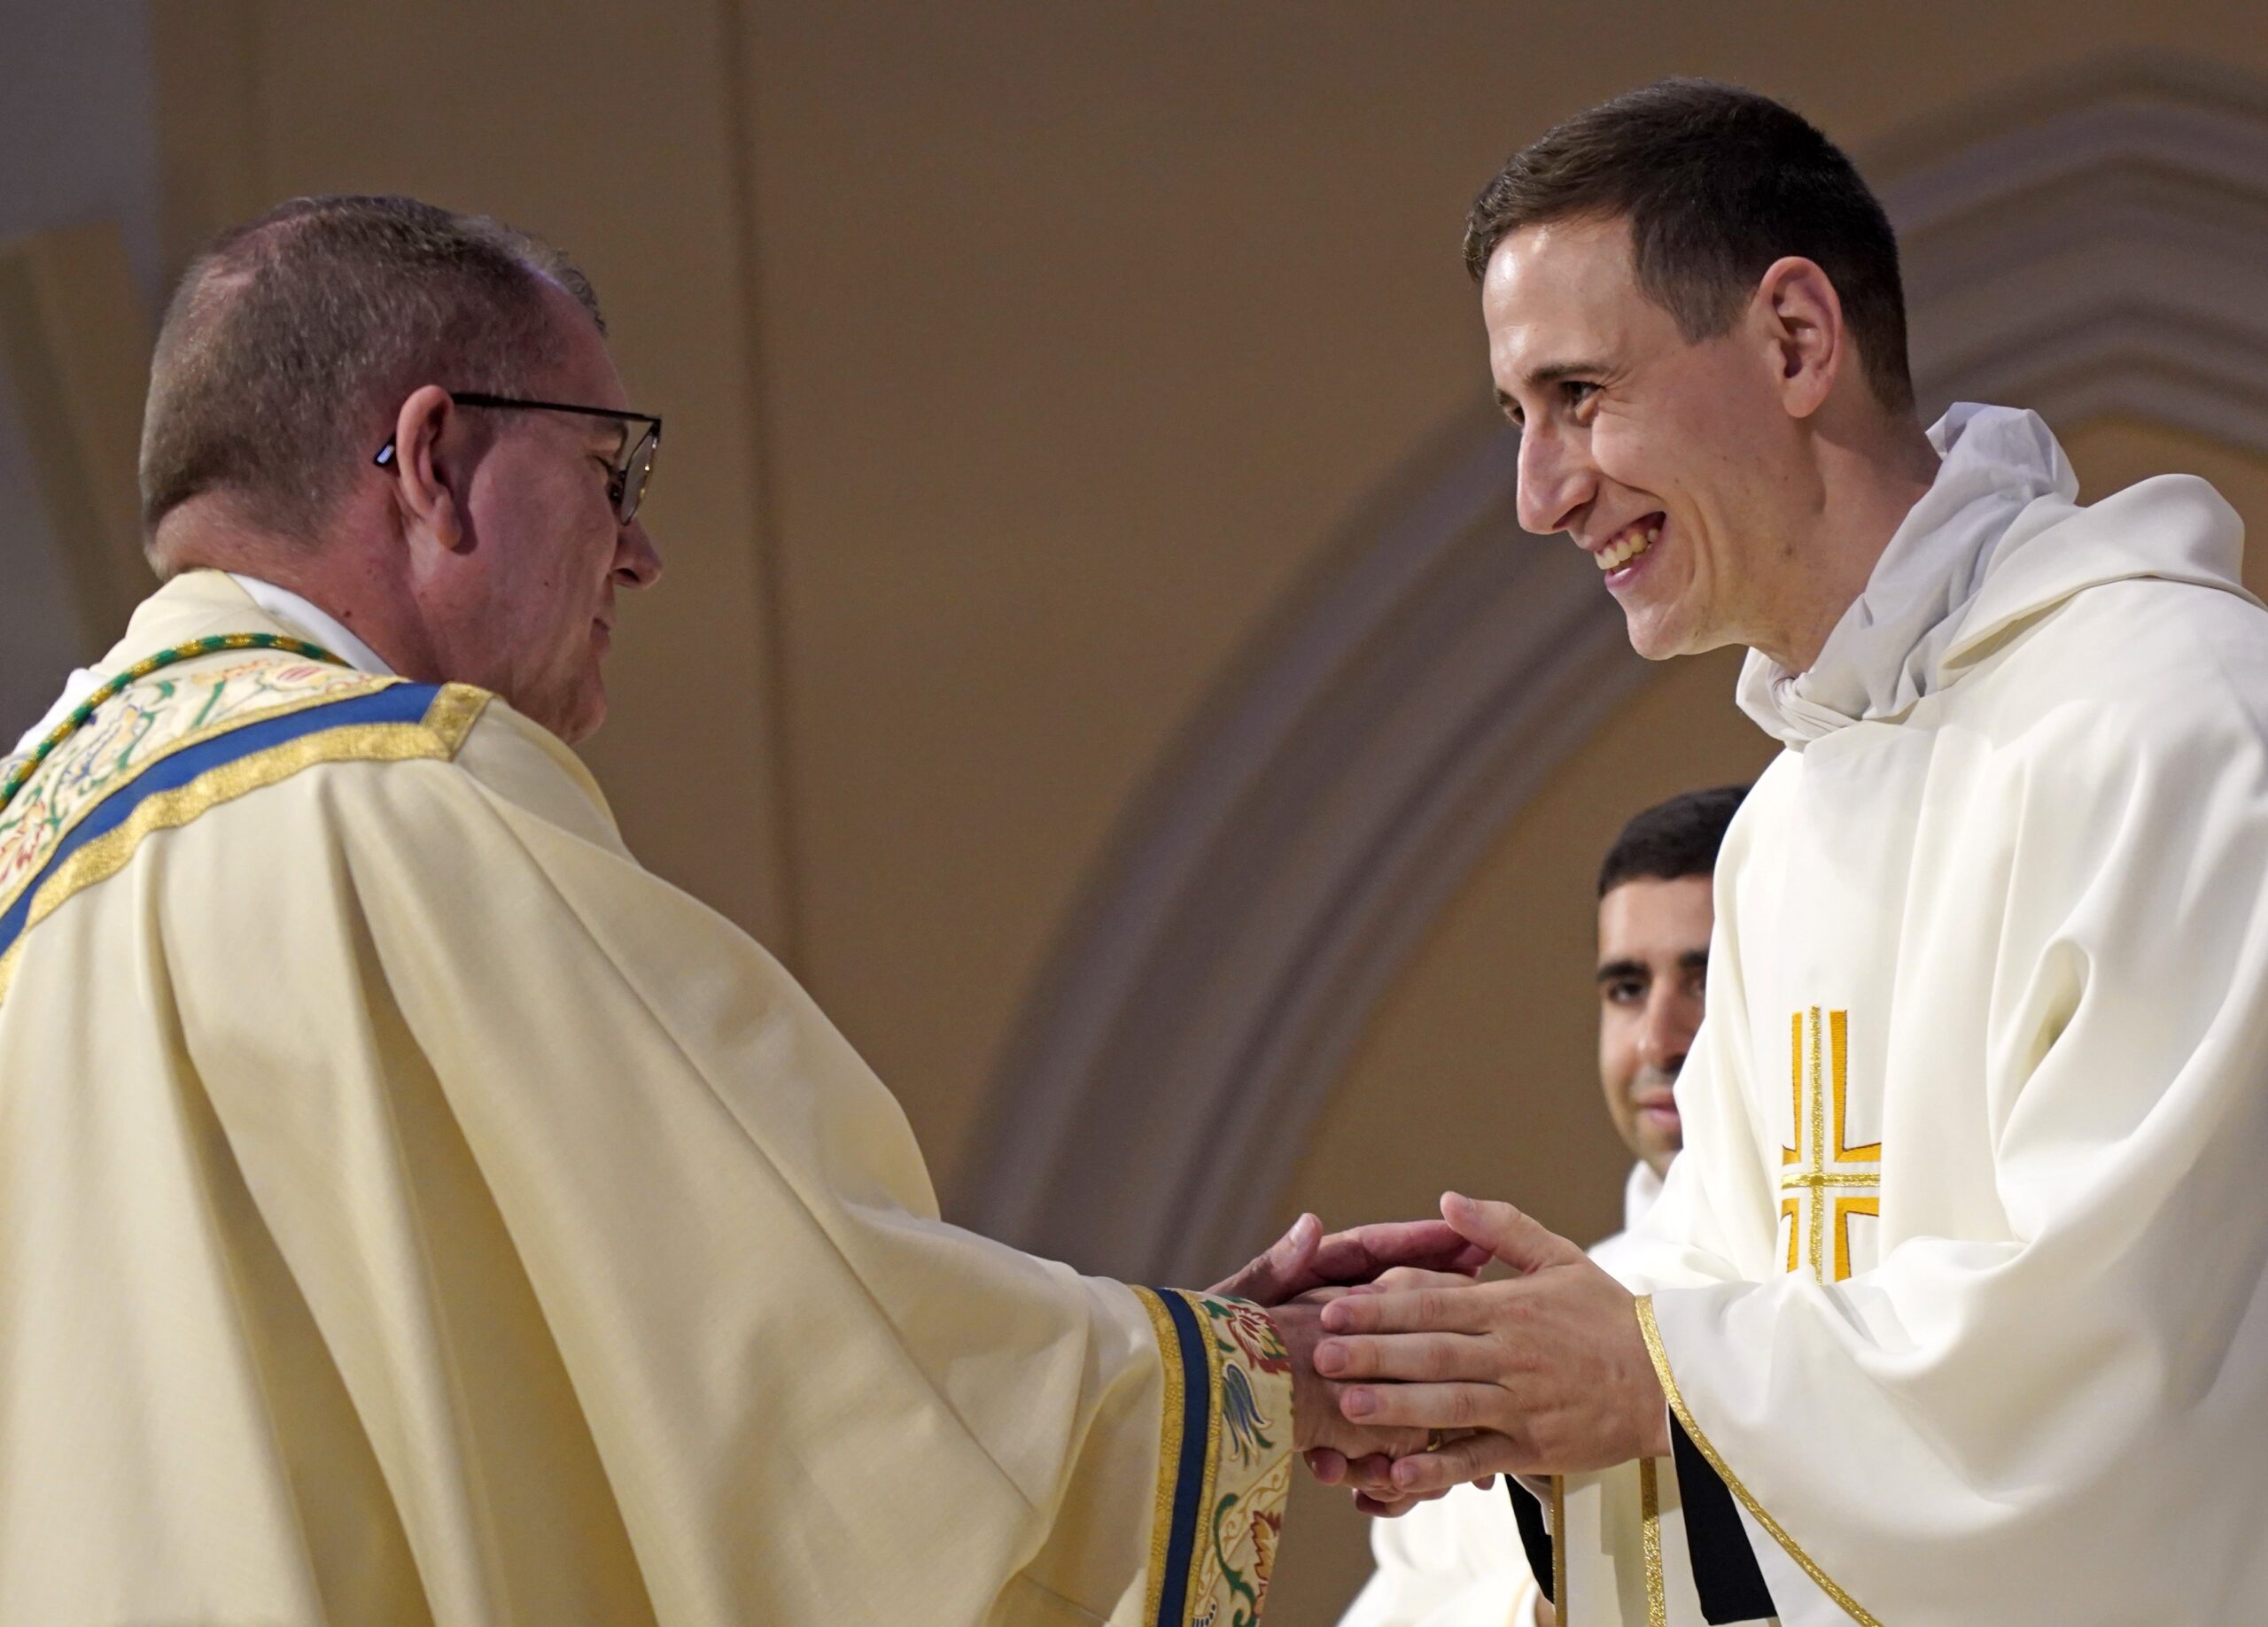 Father Stephen Rooney smiles as he exchanges the sign of peace with Bishop John O. Barres of Rockville Centre, N.Y., during his ordination to the priesthood at St. Agnes Cathedral in Rockville Centre June 18, 2022. (OSV News photo/Gregory A. Shemitz)